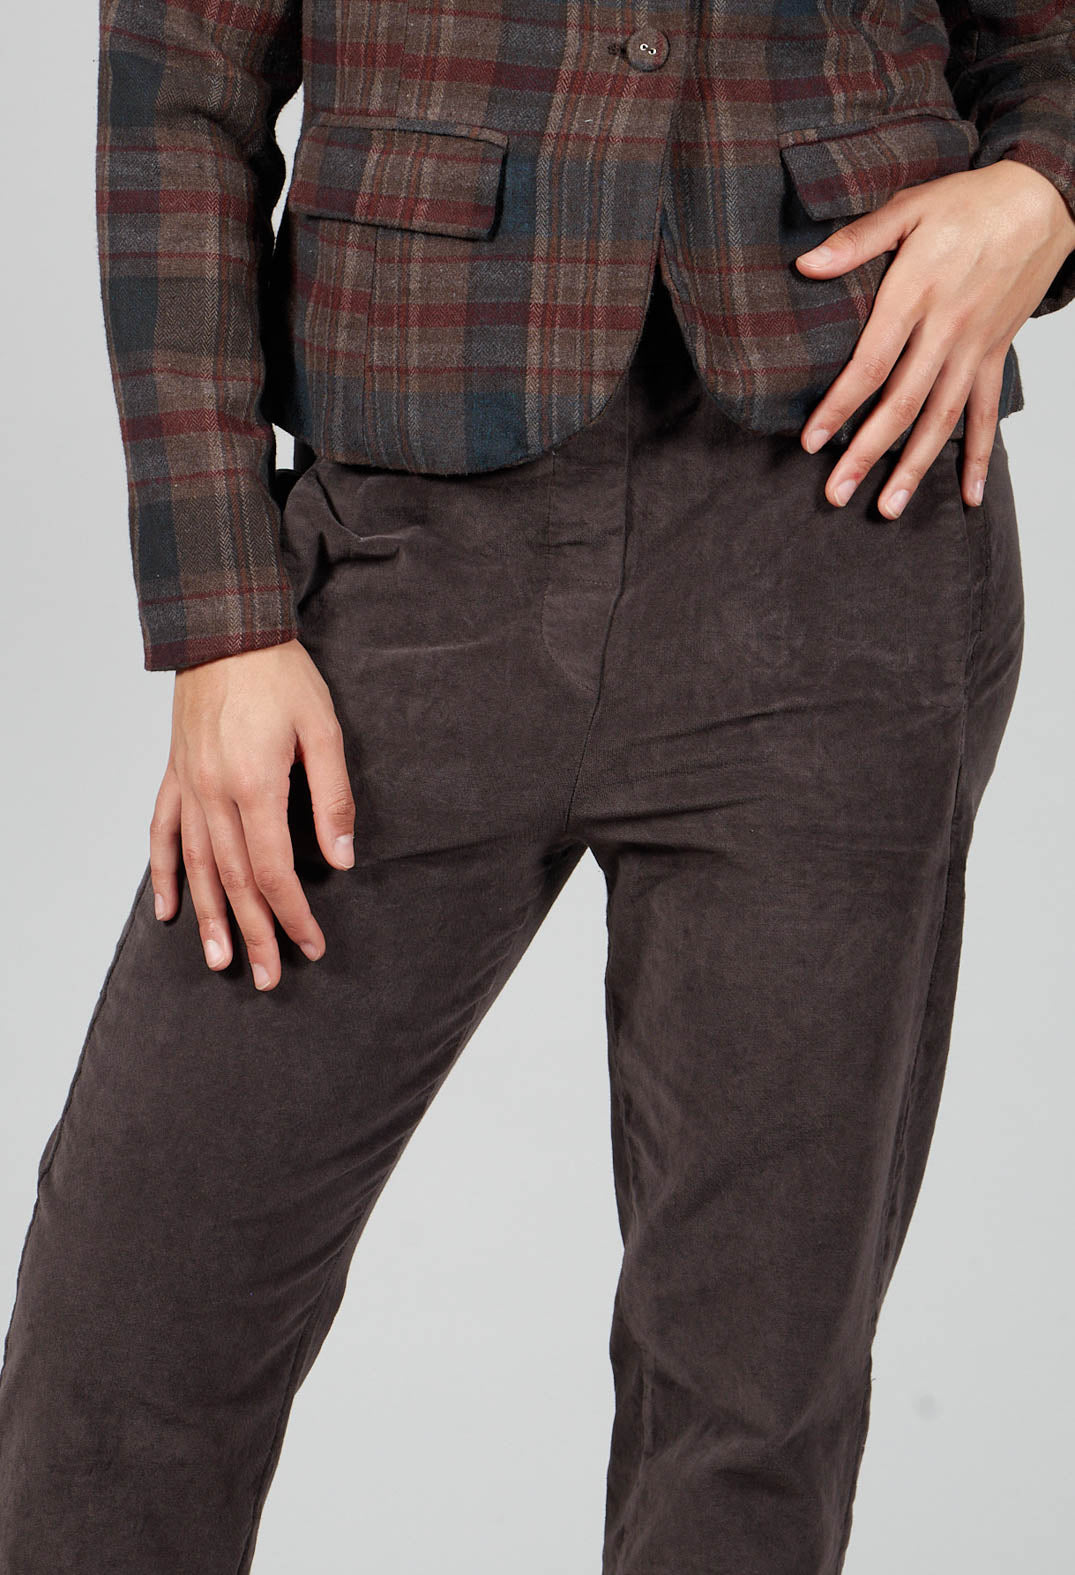 Elastic Waist Trousers with Pockets in Espresso